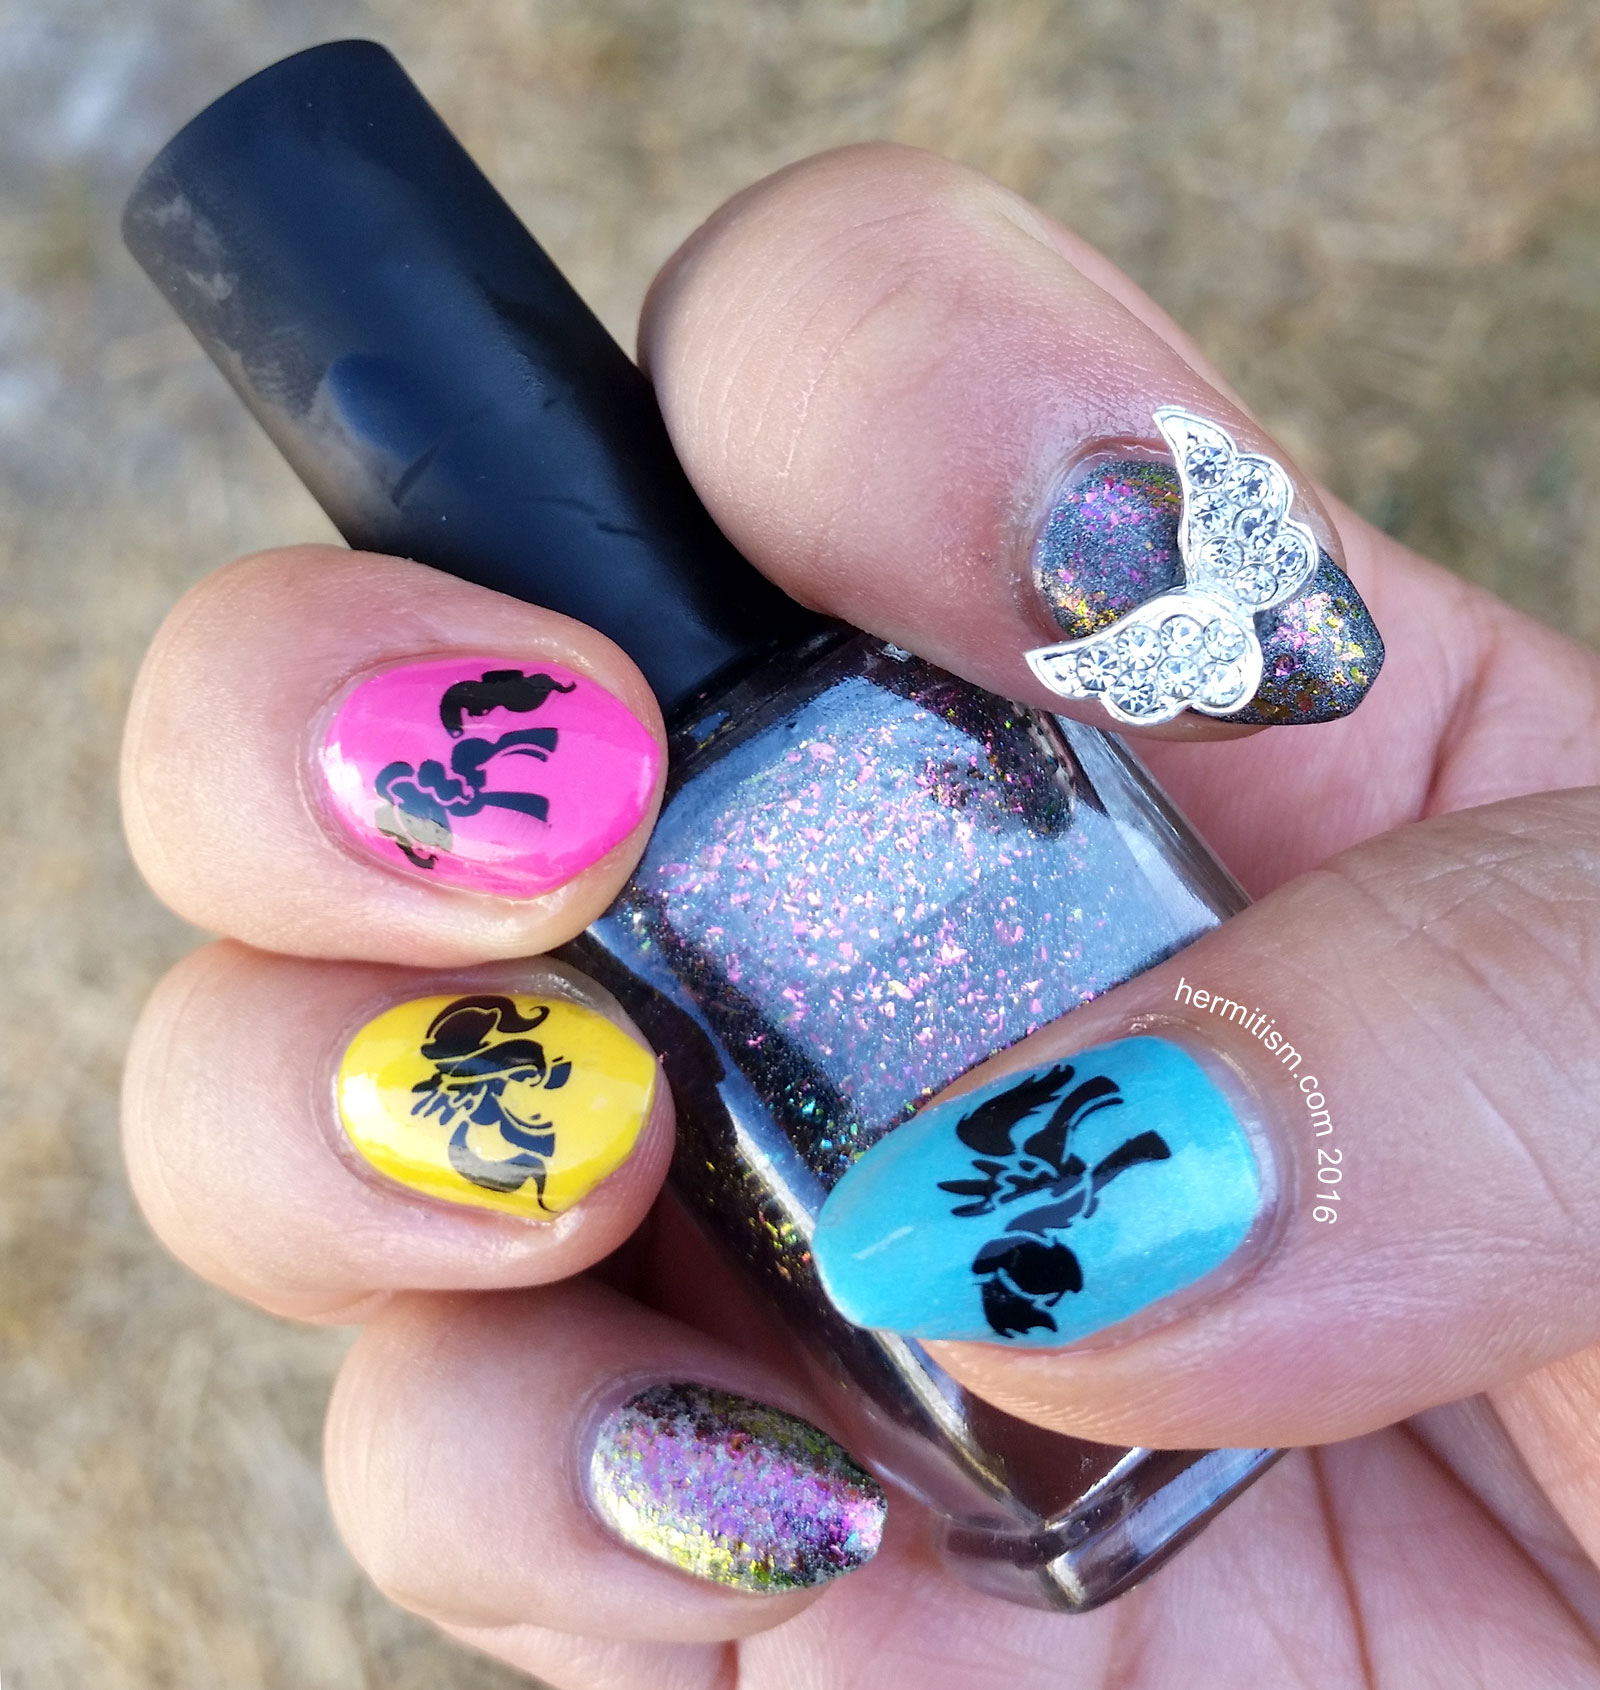 M is for My Little Pony - ABC Nail Art Challenge - Hermit Werds